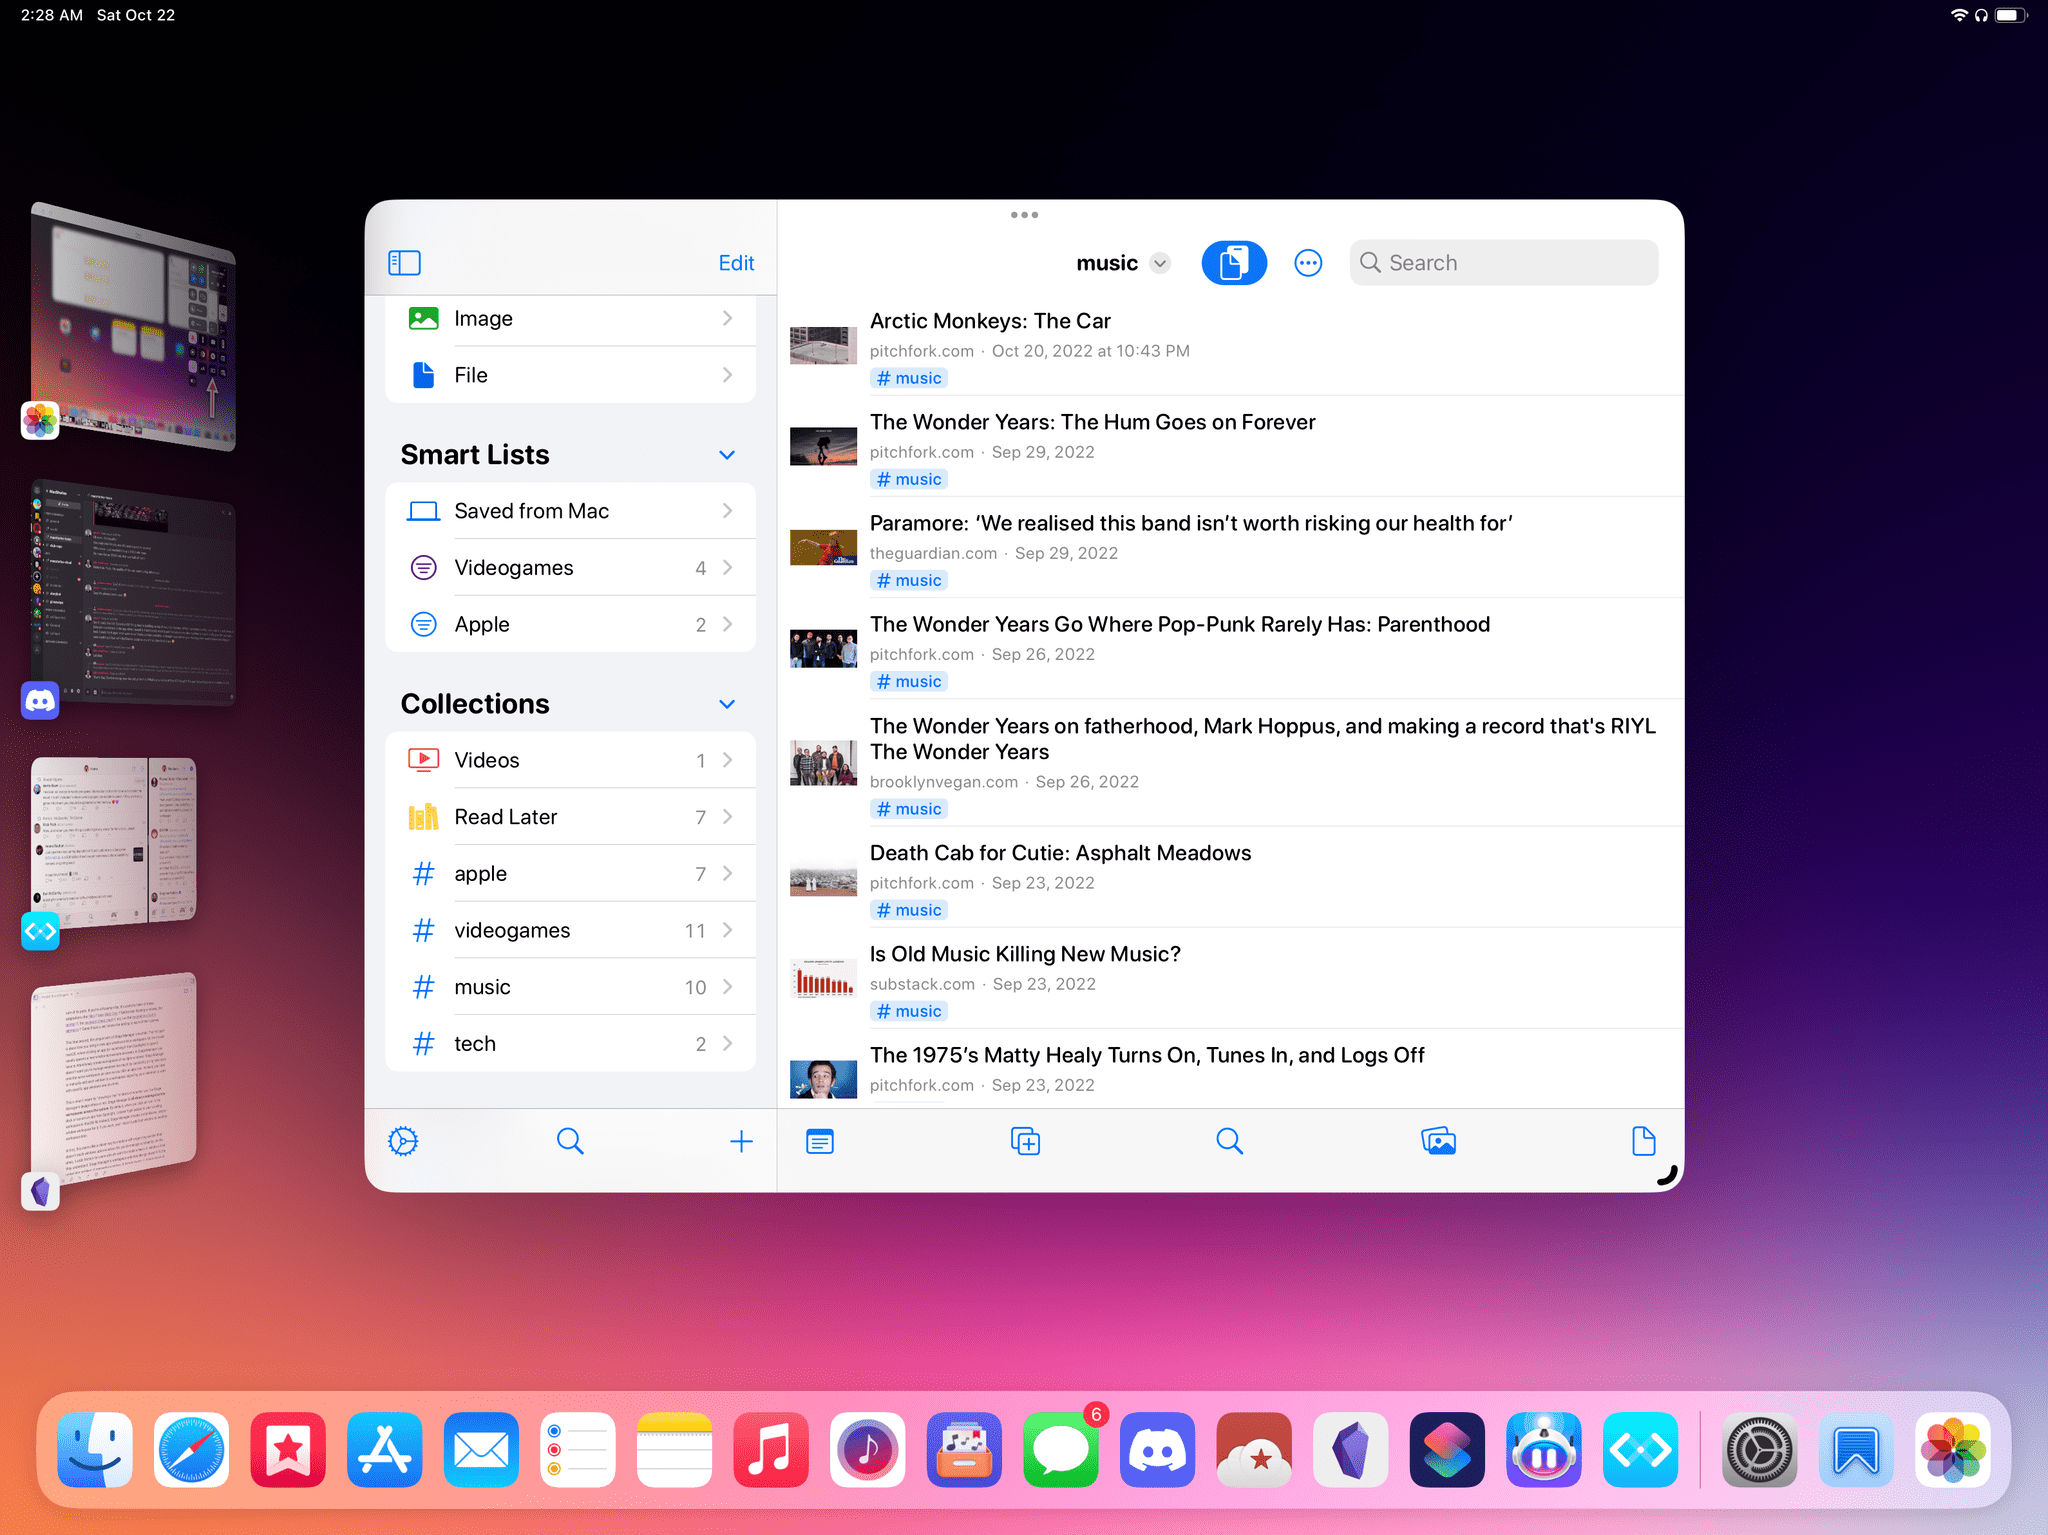 Every time you click on an app, Stage Manager creates a separate workspace for it instead of opening it alongside your other apps.